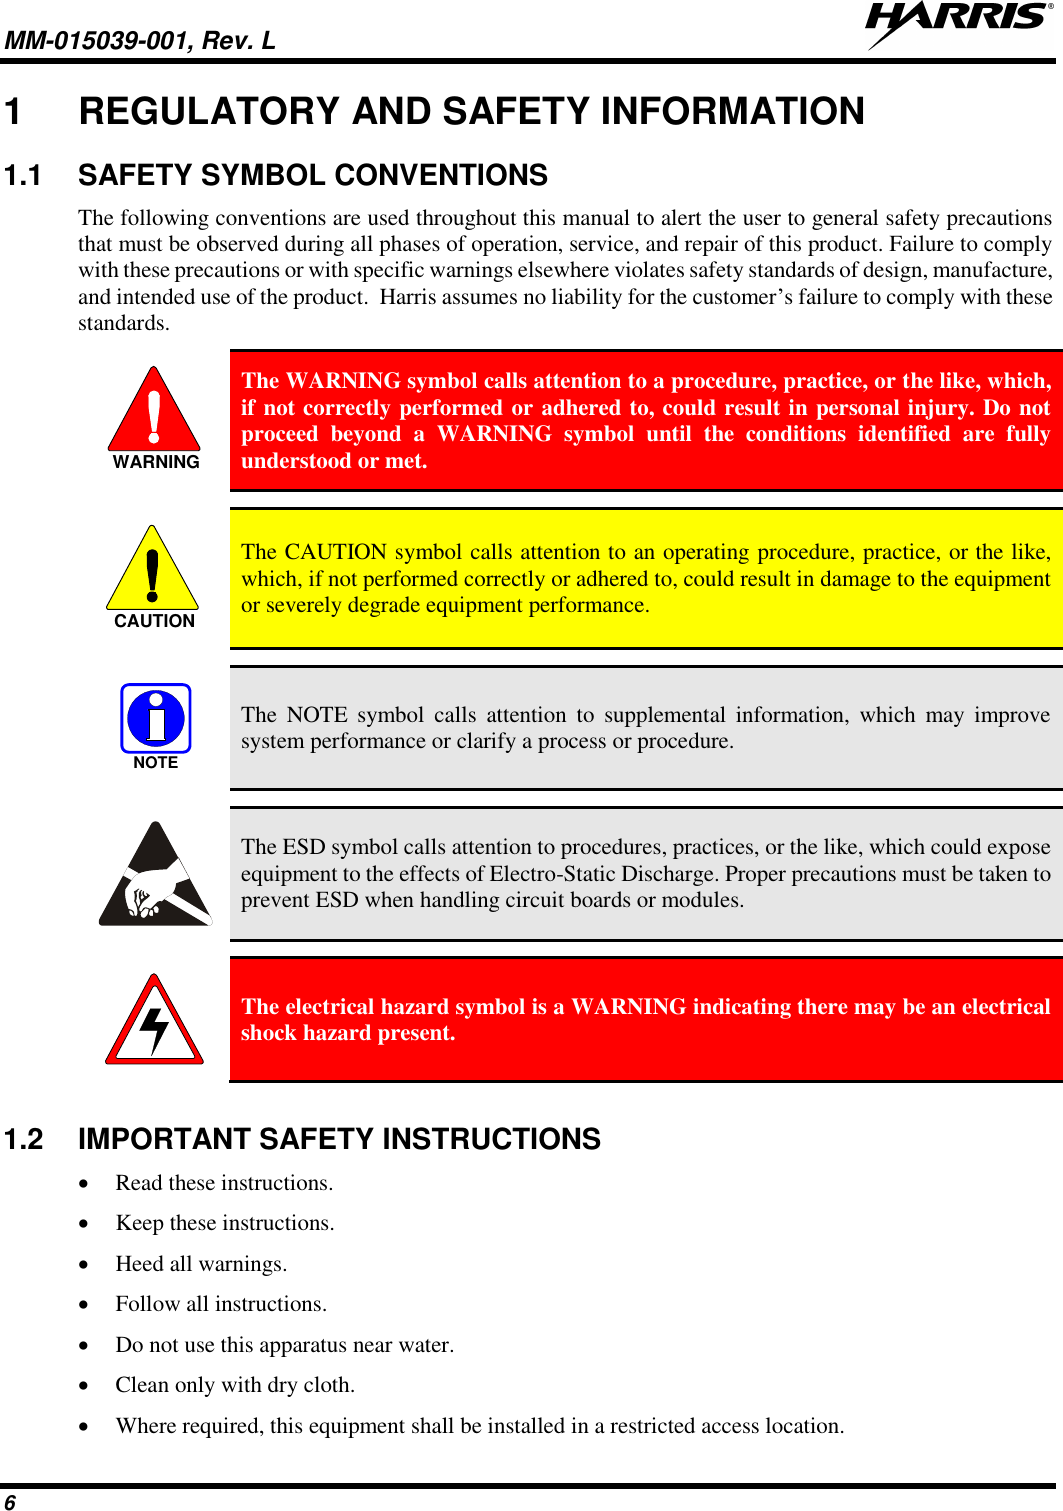 MM-015039-001, Rev. L     6 1  REGULATORY AND SAFETY INFORMATION 1.1  SAFETY SYMBOL CONVENTIONS The following conventions are used throughout this manual to alert the user to general safety precautions that must be observed during all phases of operation, service, and repair of this product. Failure to comply with these precautions or with specific warnings elsewhere violates safety standards of design, manufacture, and intended use of the product.  Harris assumes no liability for the customer’s failure to comply with these standards.  The WARNING symbol calls attention to a procedure, practice, or the like, which, if not correctly performed or adhered to, could result in personal injury. Do not proceed  beyond  a  WARNING  symbol  until  the  conditions  identified  are  fully understood or met.    The CAUTION symbol calls attention to an operating procedure, practice, or the like, which, if not performed correctly or adhered to, could result in damage to the equipment or severely degrade equipment performance.    The  NOTE  symbol  calls  attention  to  supplemental information,  which  may  improve system performance or clarify a process or procedure.    The ESD symbol calls attention to procedures, practices, or the like, which could expose equipment to the effects of Electro-Static Discharge. Proper precautions must be taken to prevent ESD when handling circuit boards or modules.    The electrical hazard symbol is a WARNING indicating there may be an electrical shock hazard present.  1.2  IMPORTANT SAFETY INSTRUCTIONS • Read these instructions. • Keep these instructions. • Heed all warnings. • Follow all instructions. • Do not use this apparatus near water. • Clean only with dry cloth. • Where required, this equipment shall be installed in a restricted access location. WARNINGCAUTIONNOTE